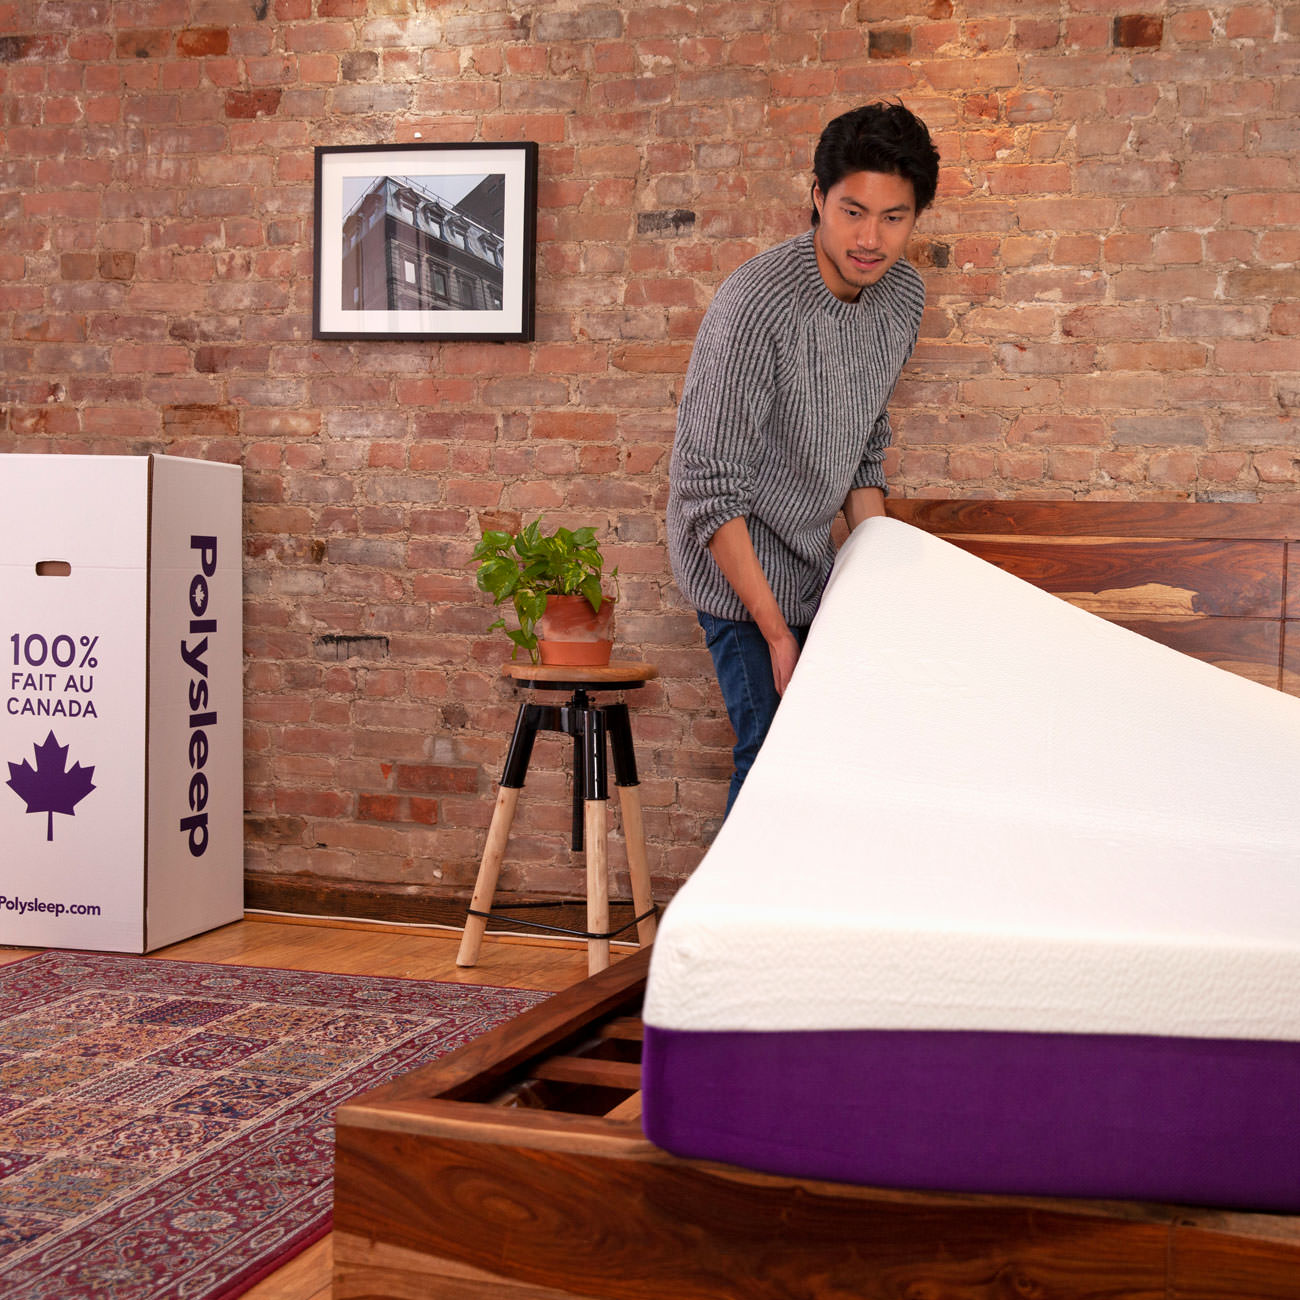 A customer is positioning his new Polysleep mattress on his bed